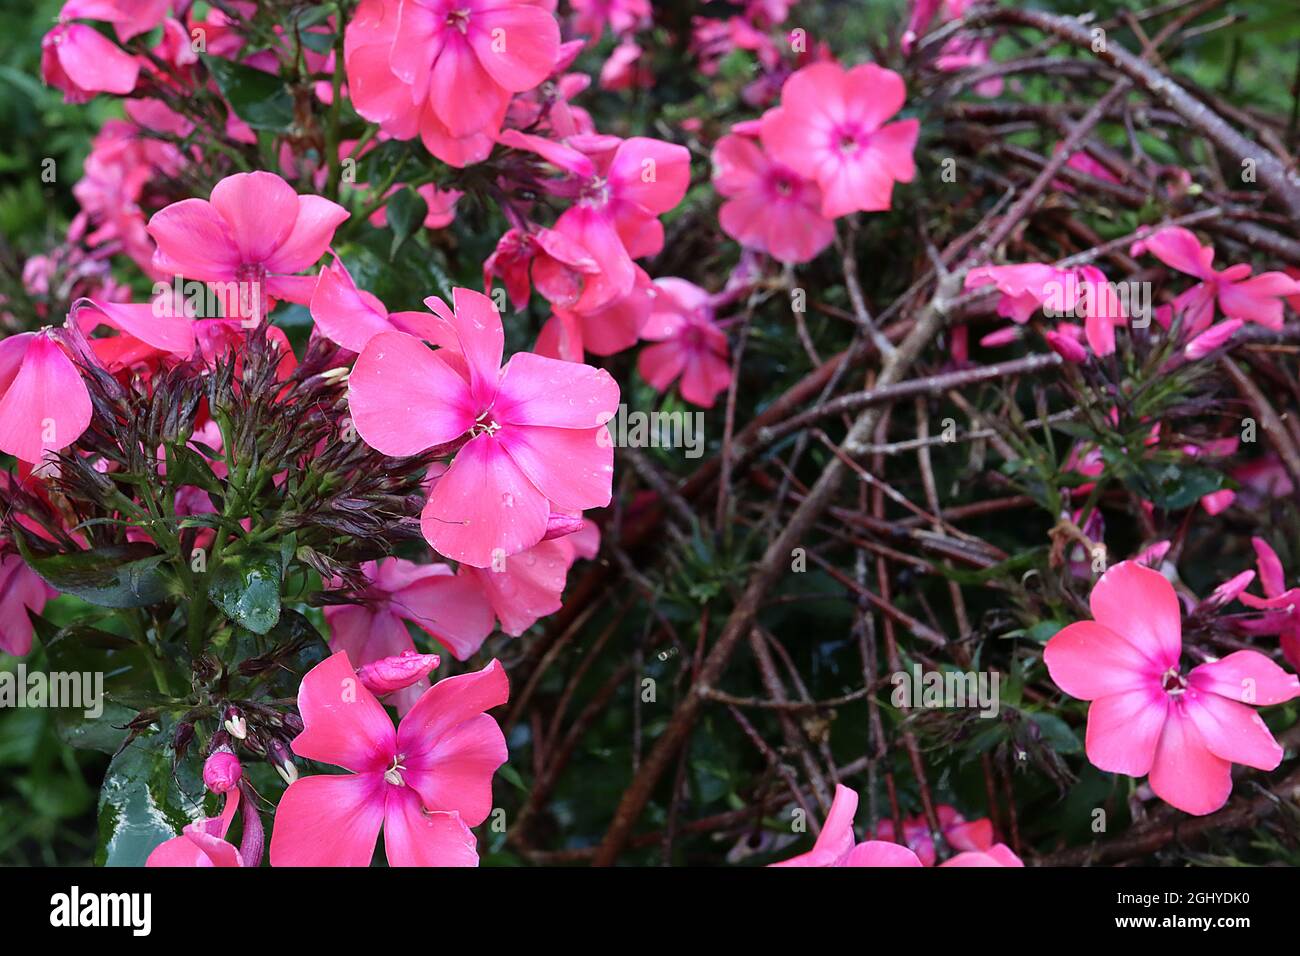 Phlox paniculata ‘Windsor’ perennial phlox Windsor - domed clusters of coral pink flowers with faint white halo and deep pink centre, August, England, Stock Photo